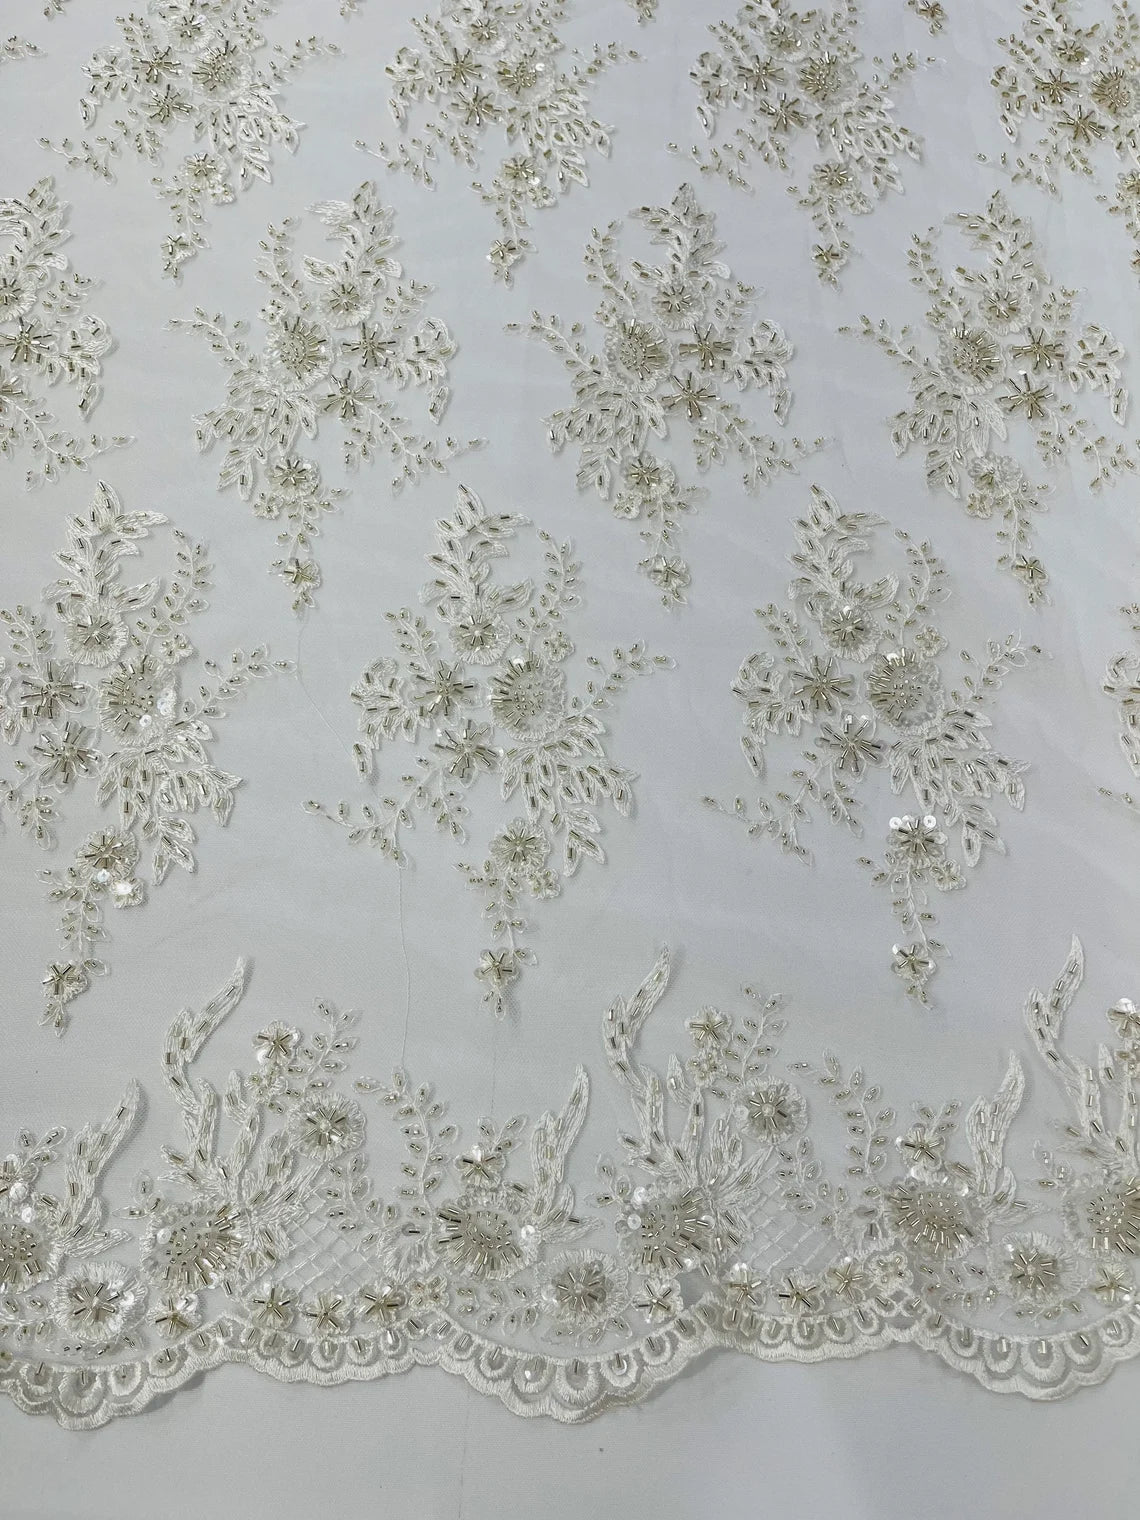 Floral Leaf Bead Sequins Fabric - Ivory - Embroidered Flower and Leaves Design Fabric By Yard